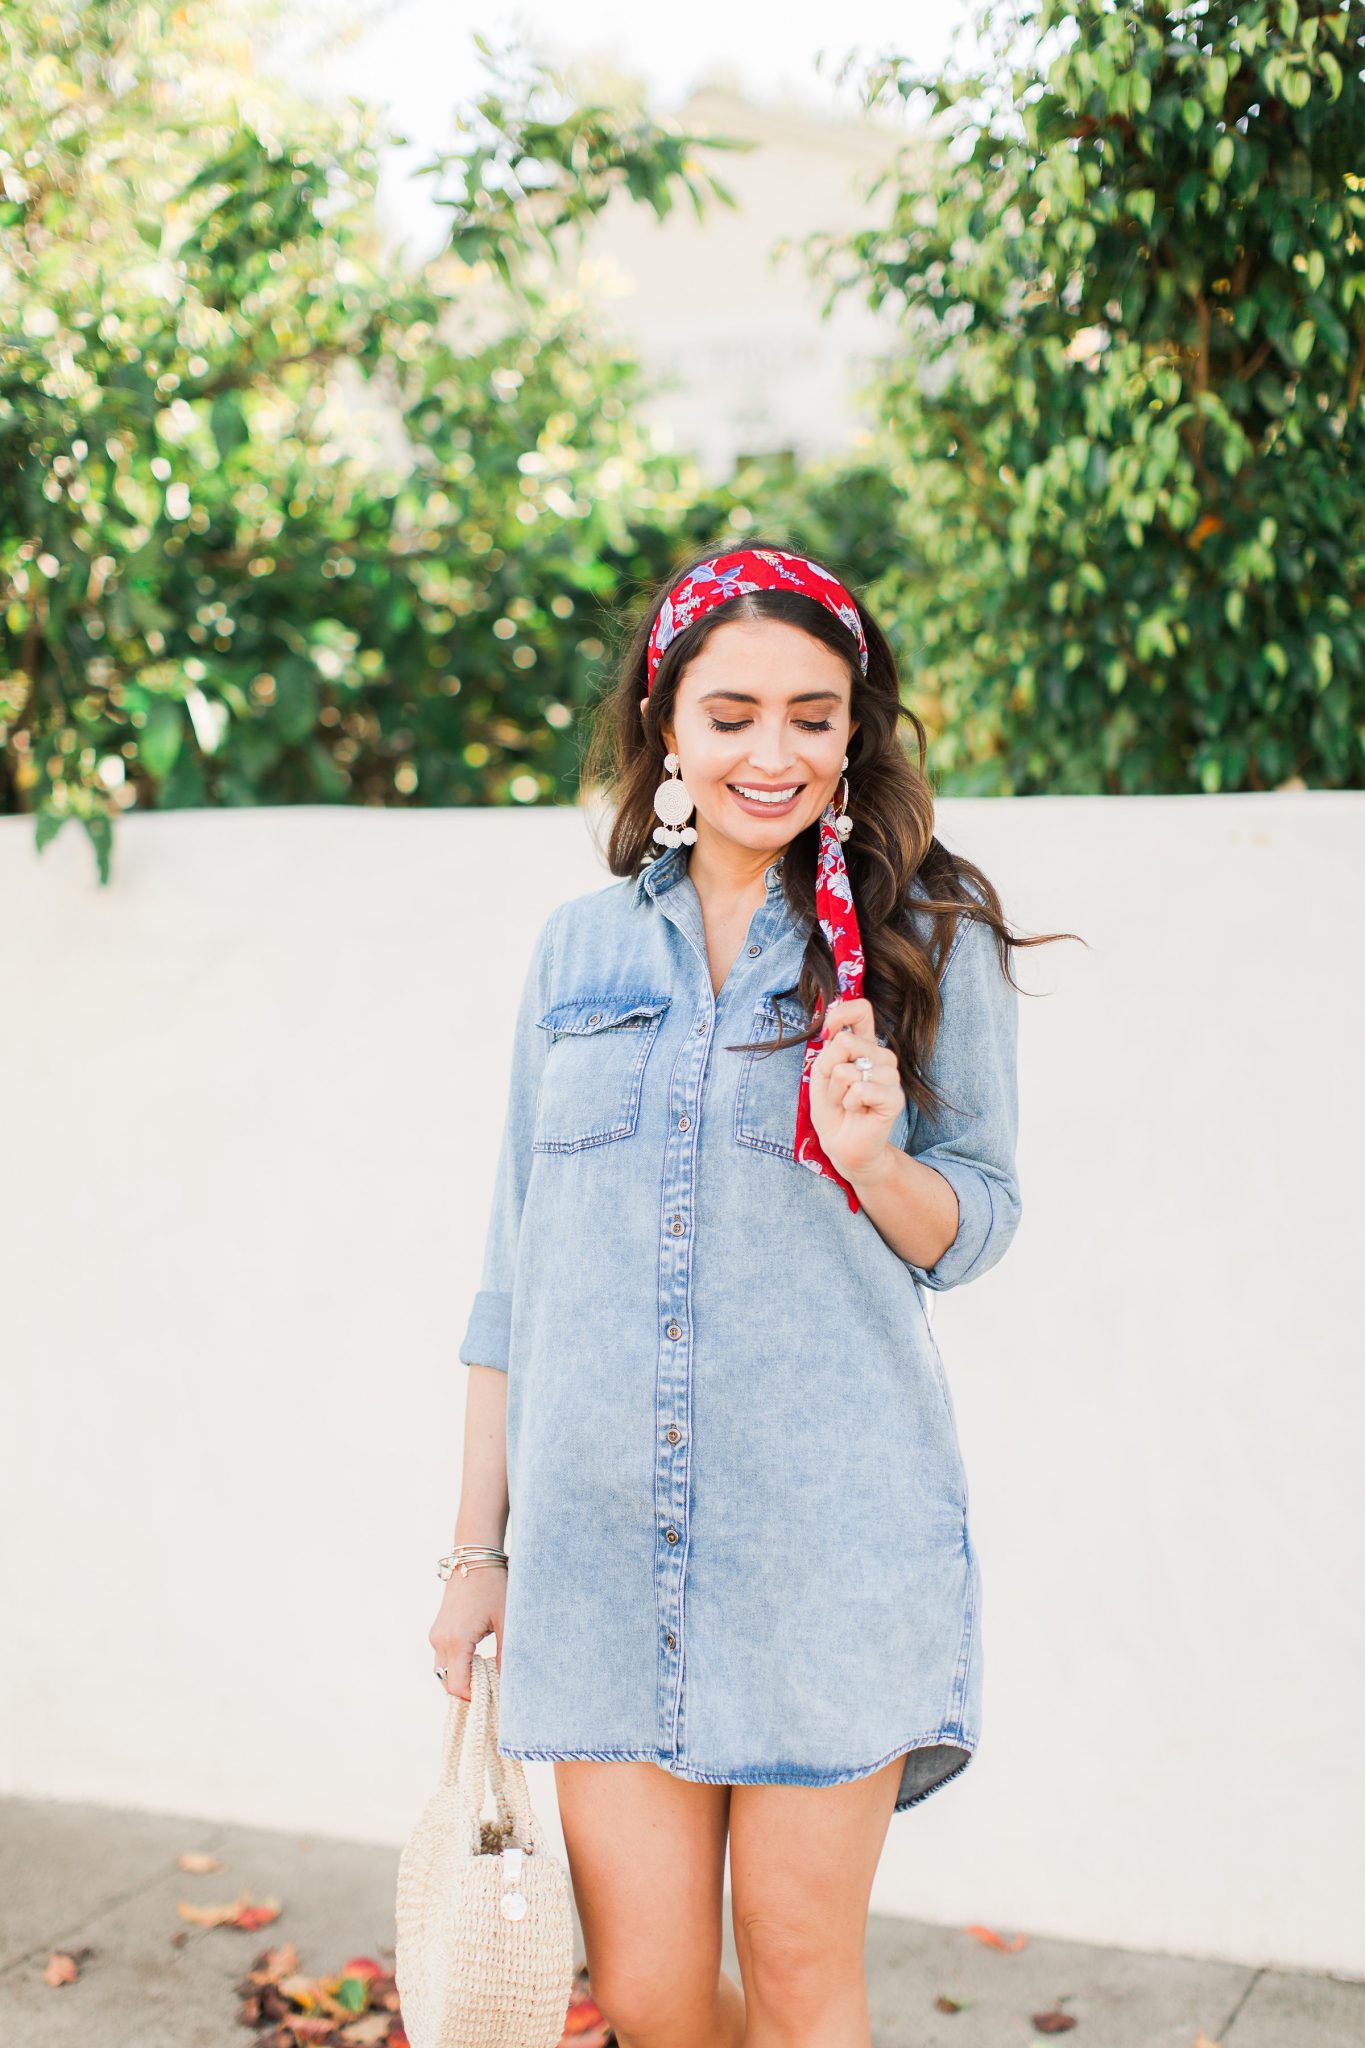 My Favorite Spring Hair Accessories by popular Orange County fashion blogger Maxie Elle